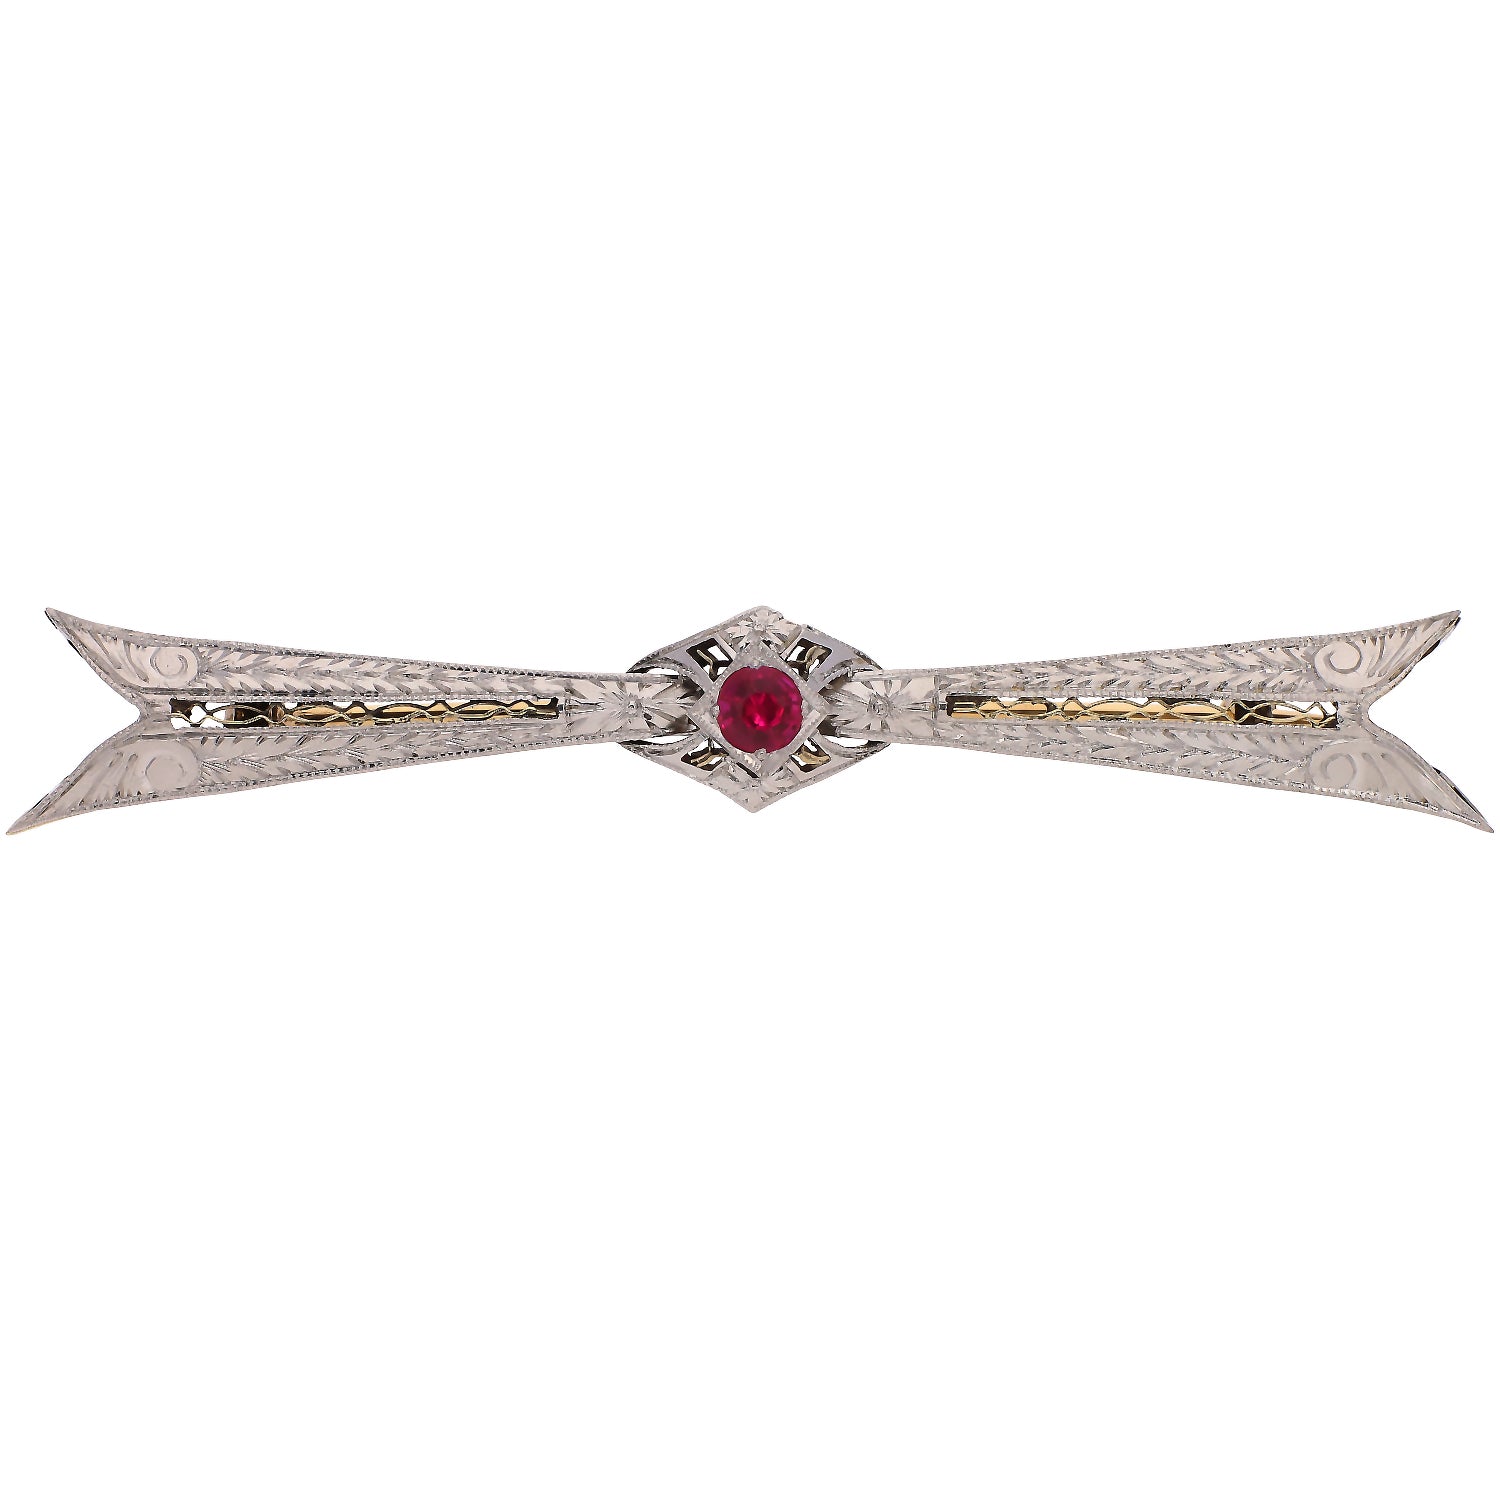 Vintage 14K White and Yellow Gold Ruby Pin/Brooch